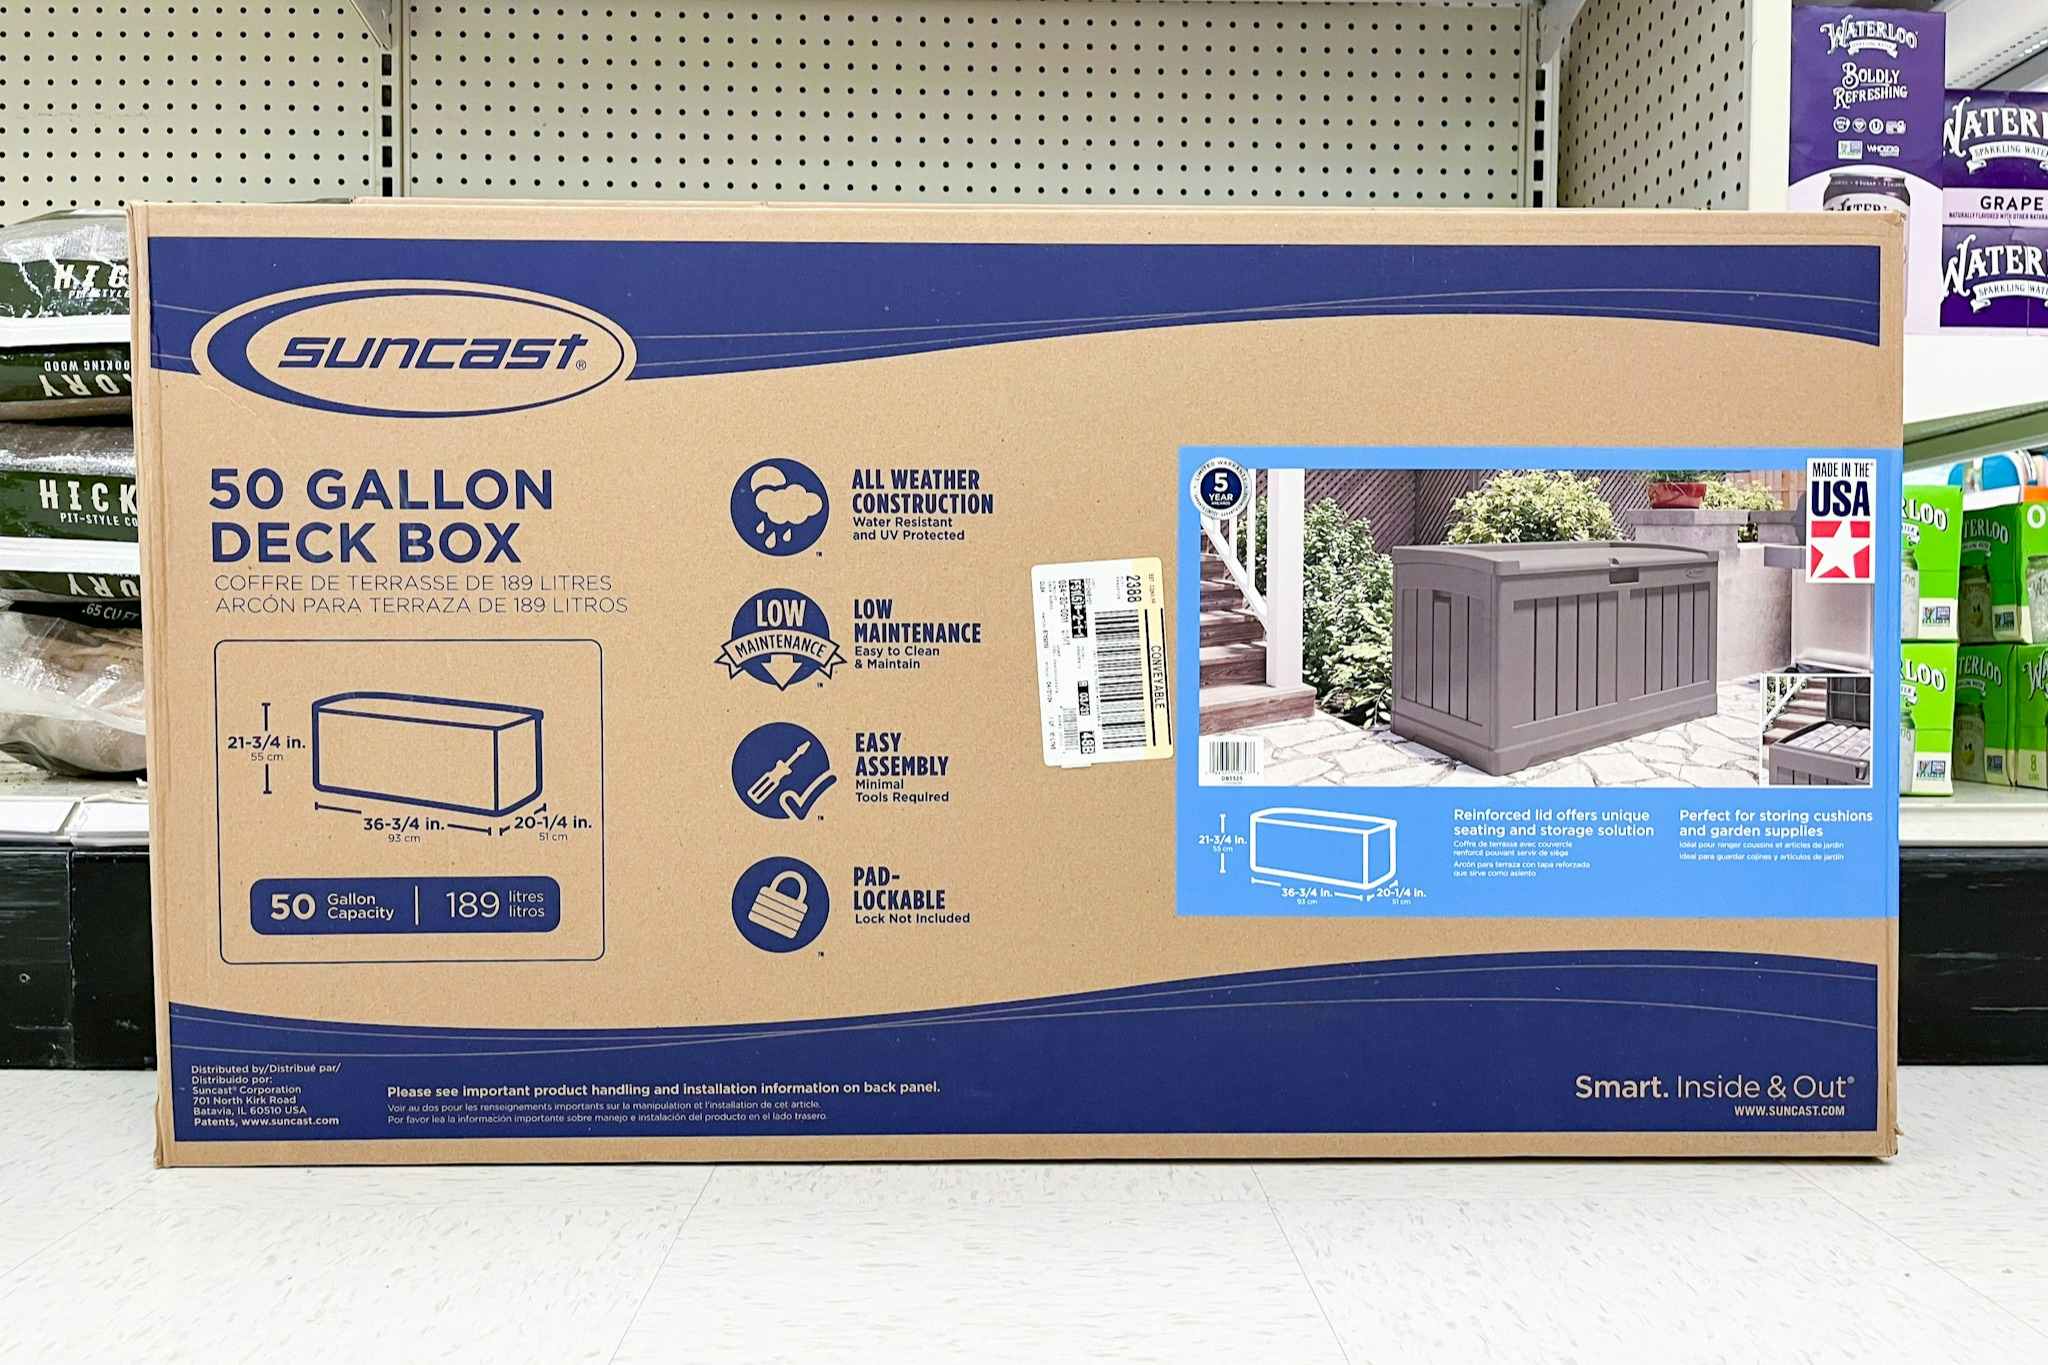 50-Gallon Deck Storage Box With Seat, Only $66.49 at Target